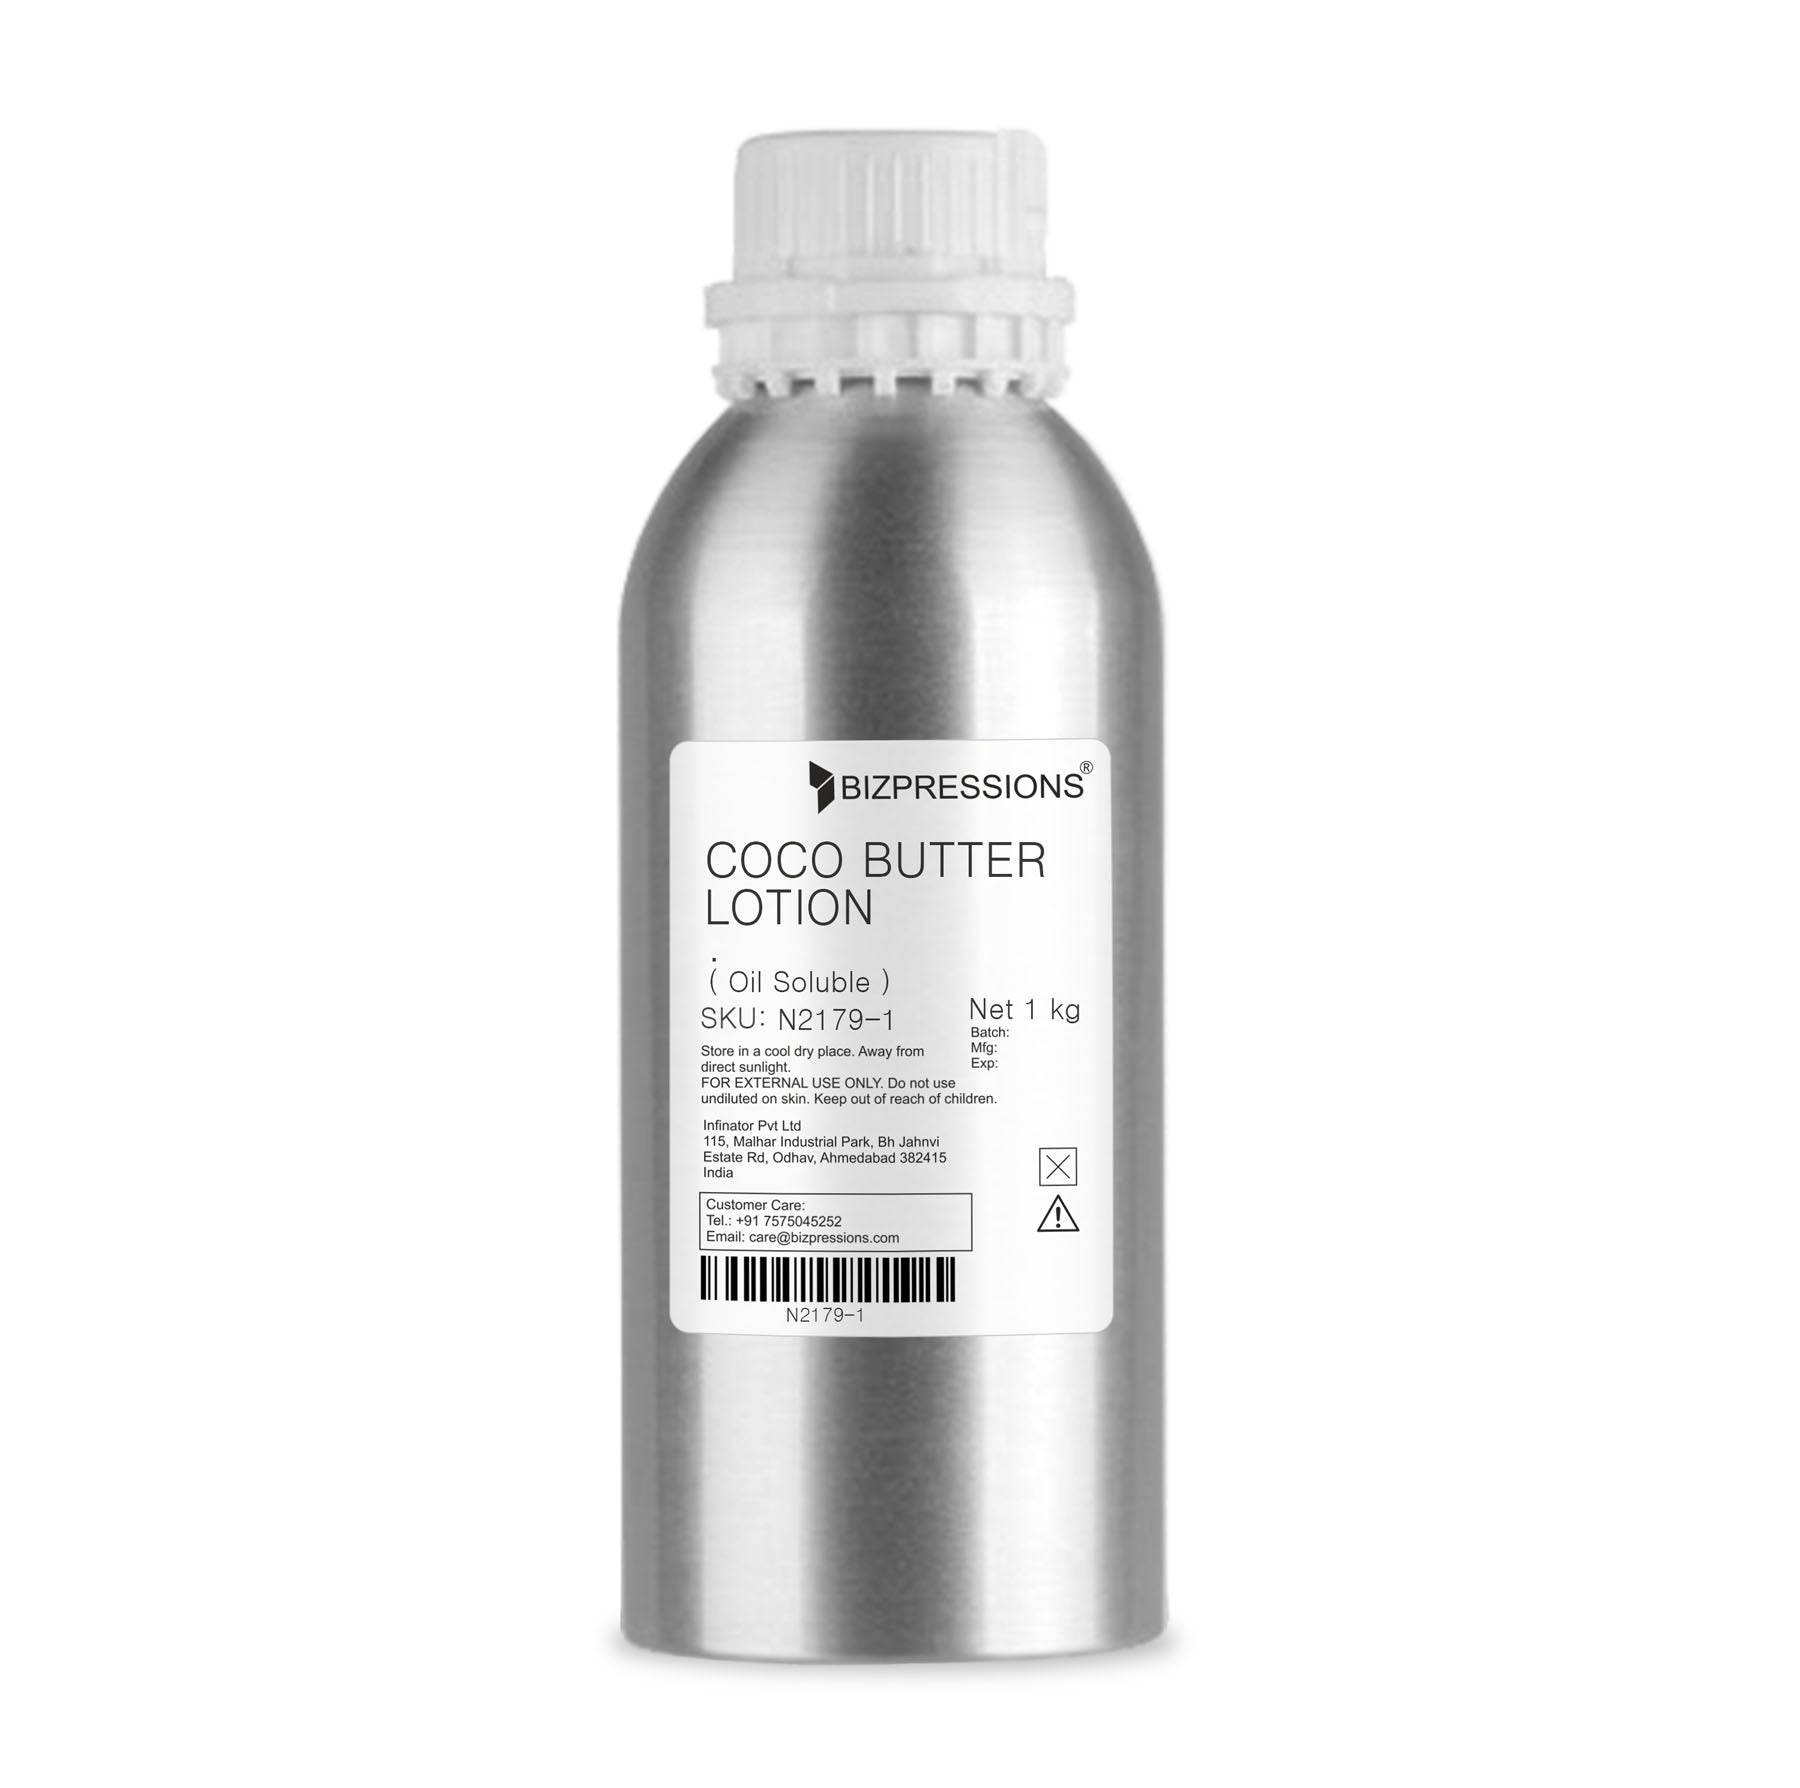 COCO BUTTER LOTION - Fragrance ( Oil Soluble ) - 1 kg